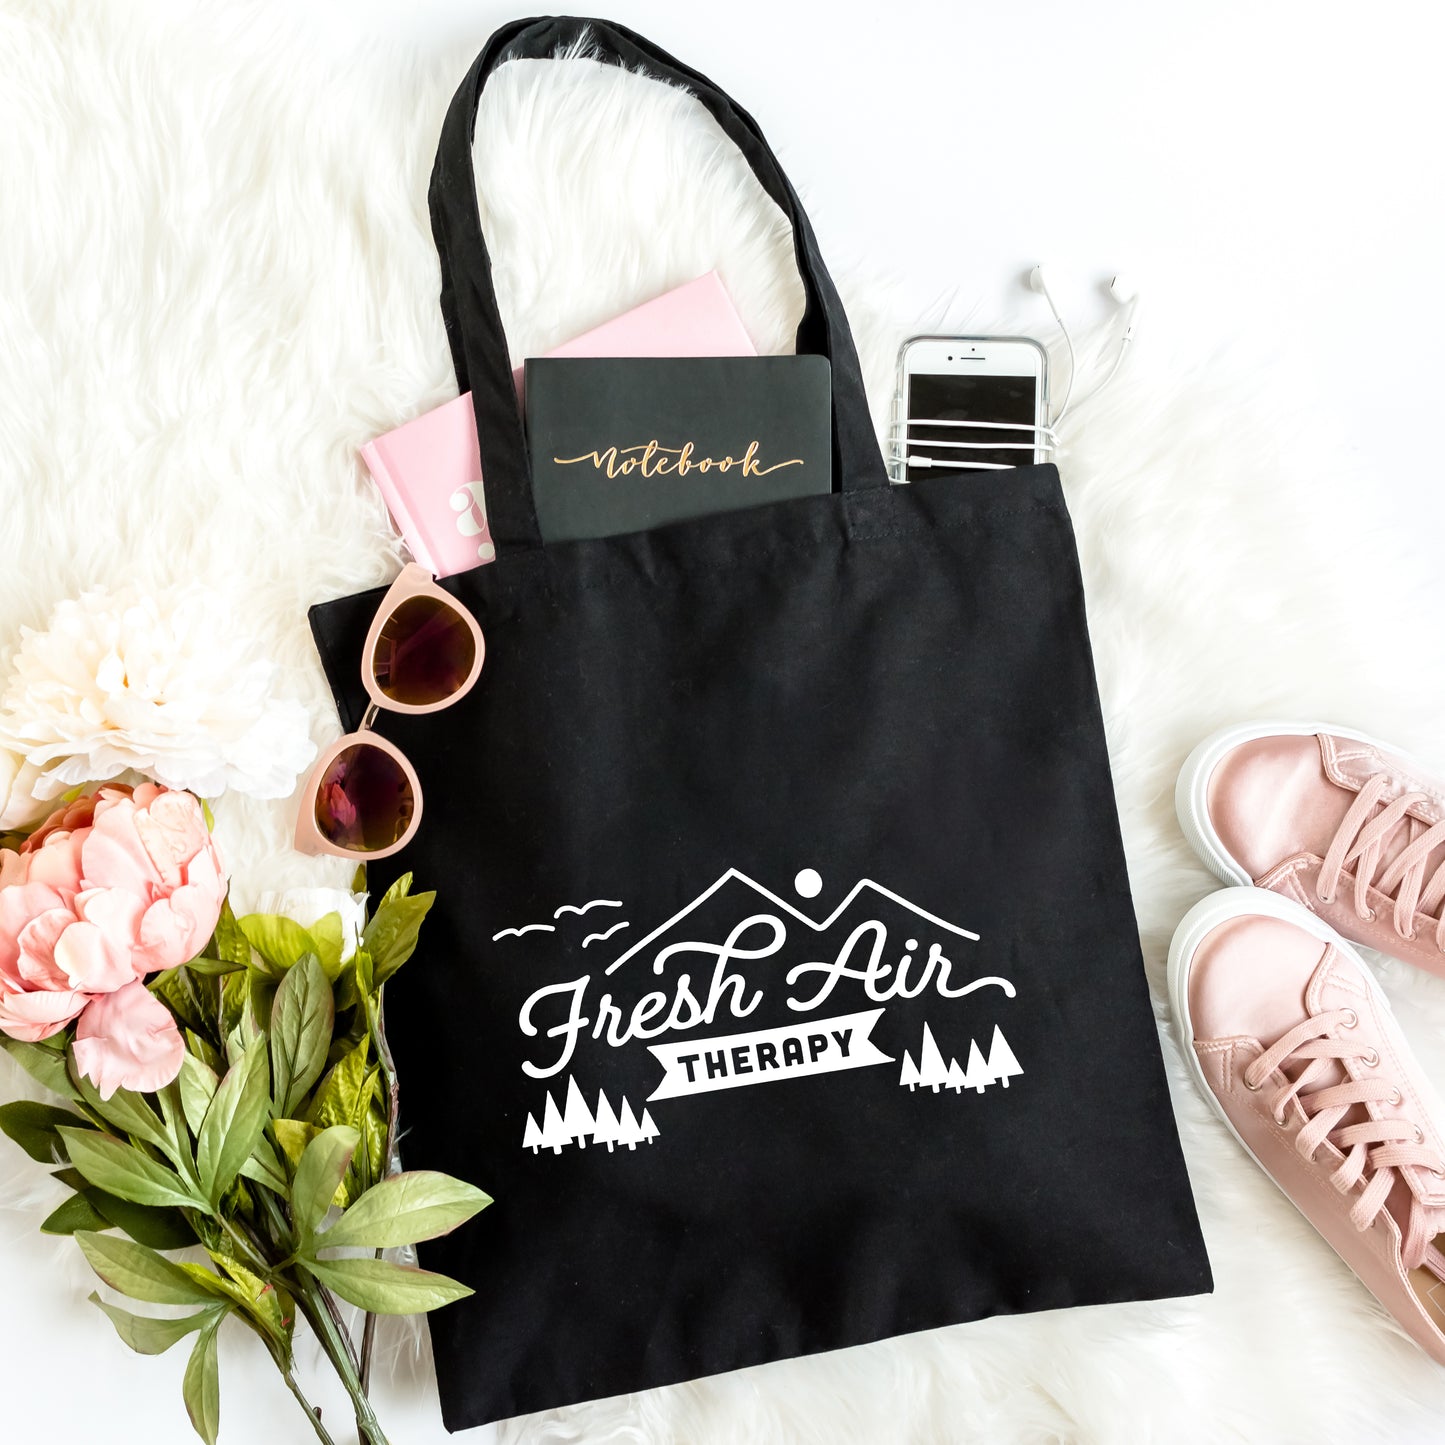 Fresh Air Therapy | Tote Bag